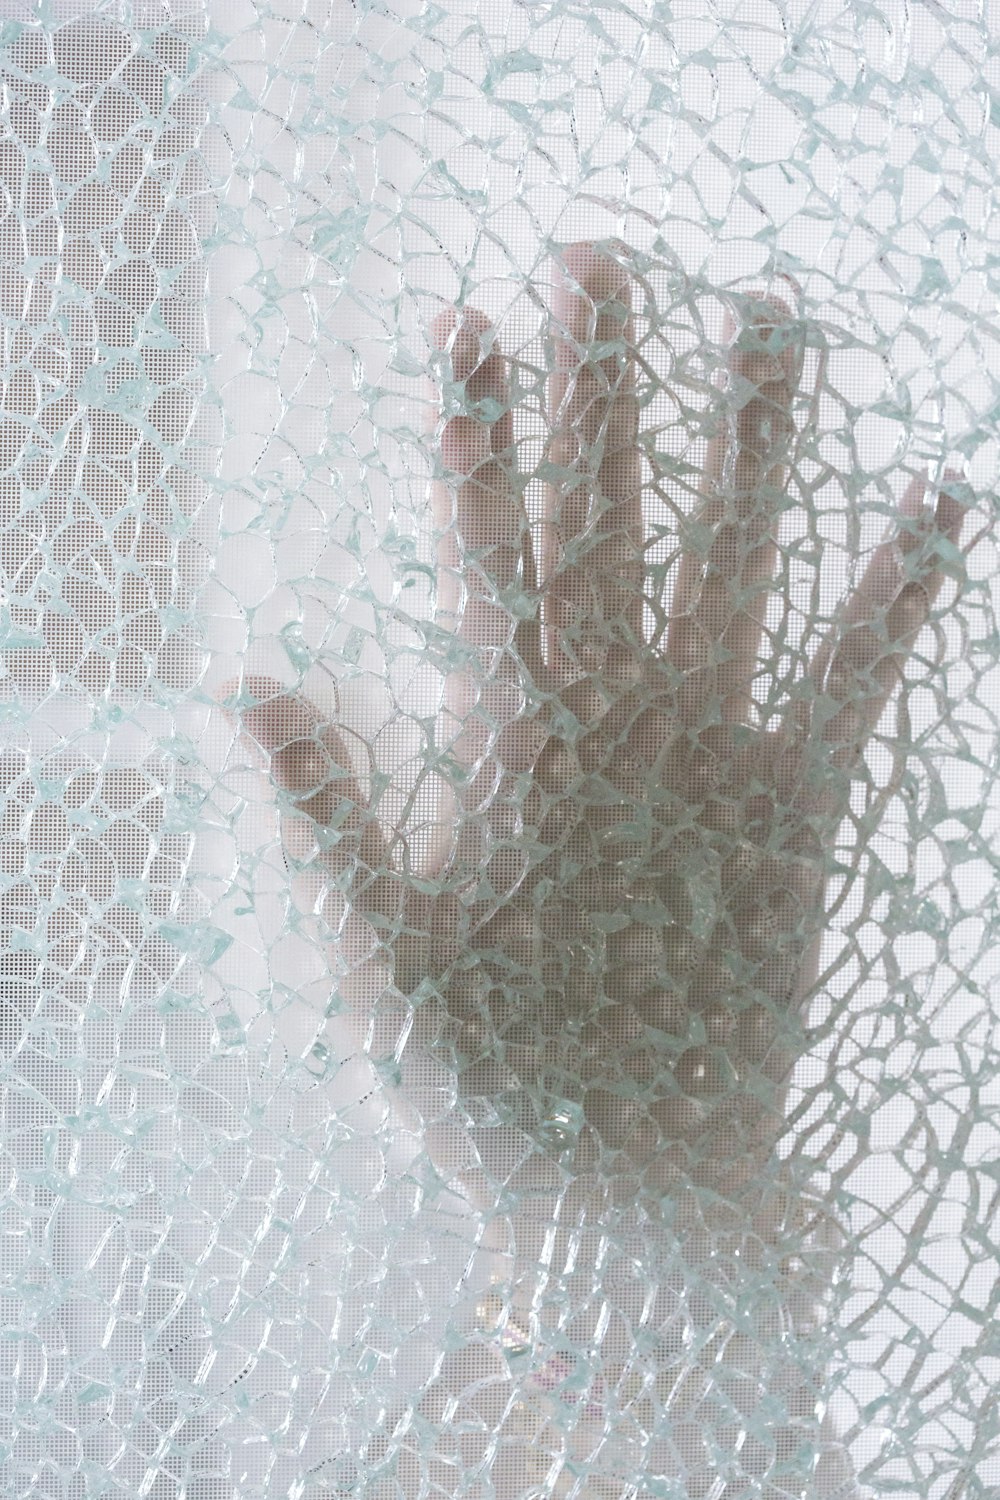 persons hand on glass